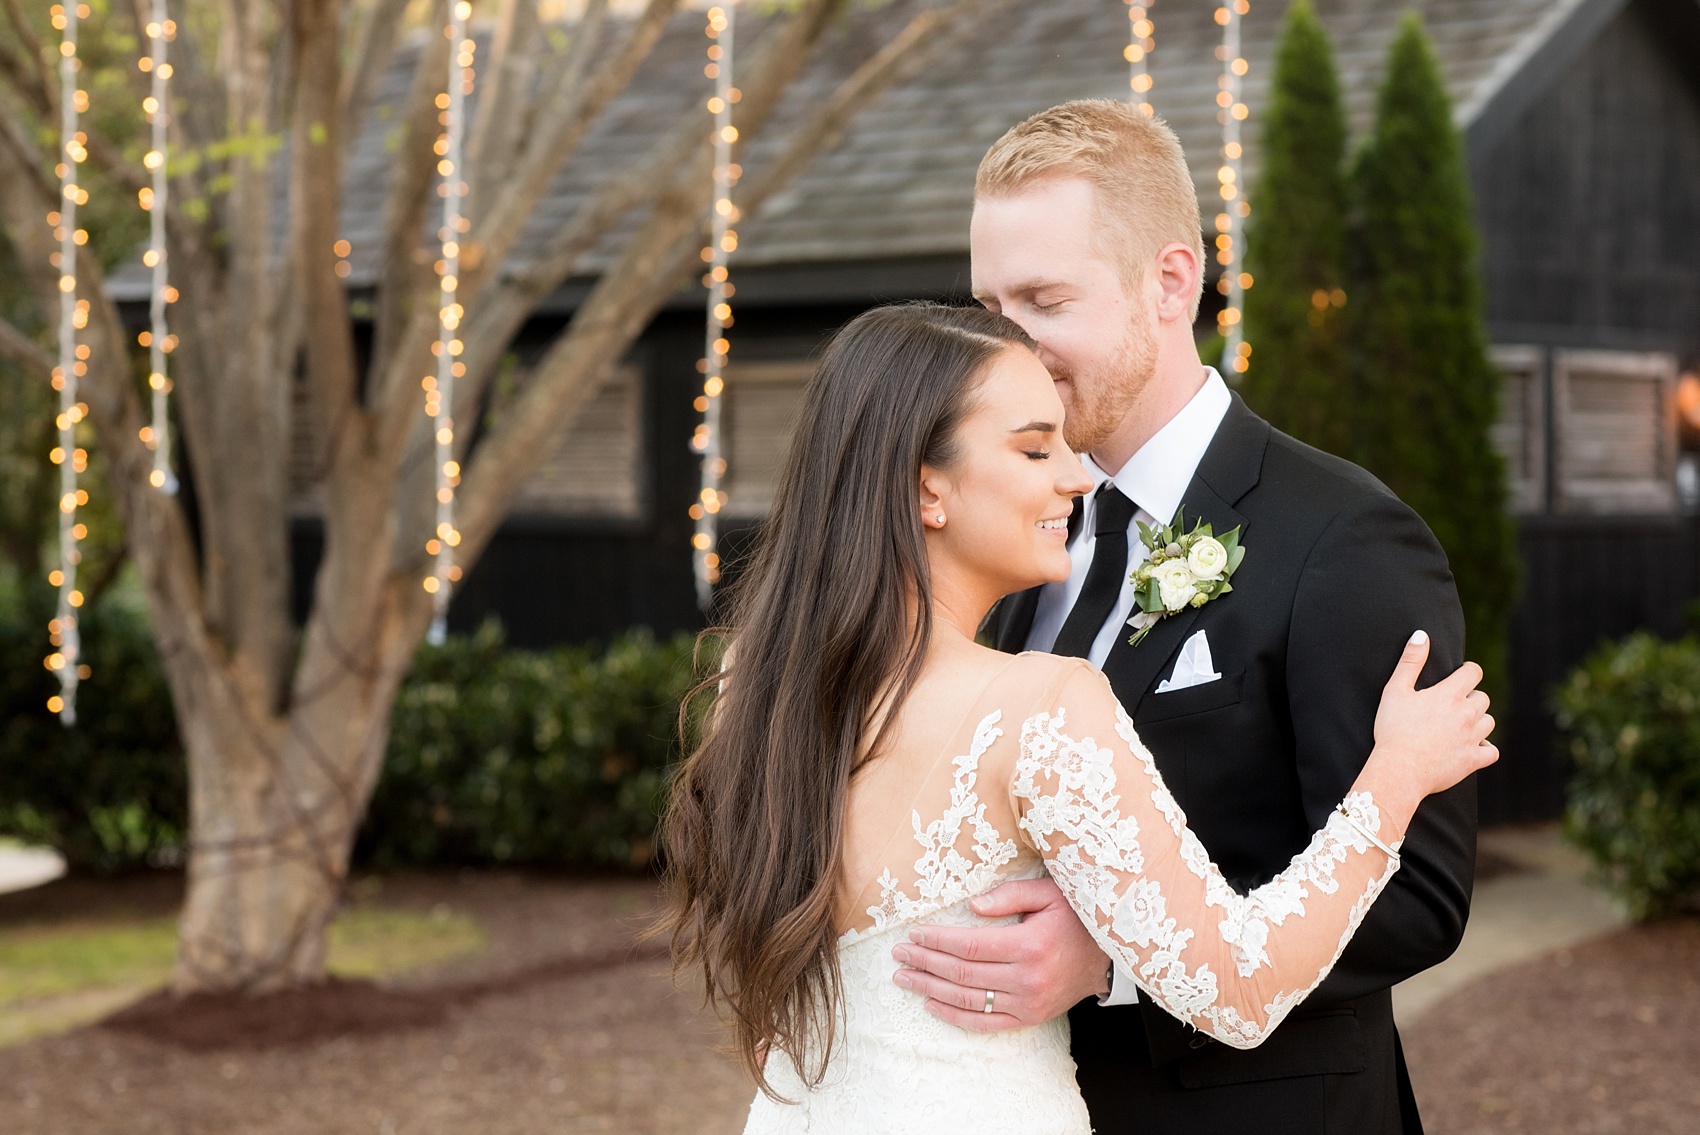 The Sutherland Wedding Photos by Mikkel Paige Photography. The bride in a long-sleeve lace Pronovias gown and groom in black suit, privately share a kiss in front of hanging twinkle lights in this creative picture.